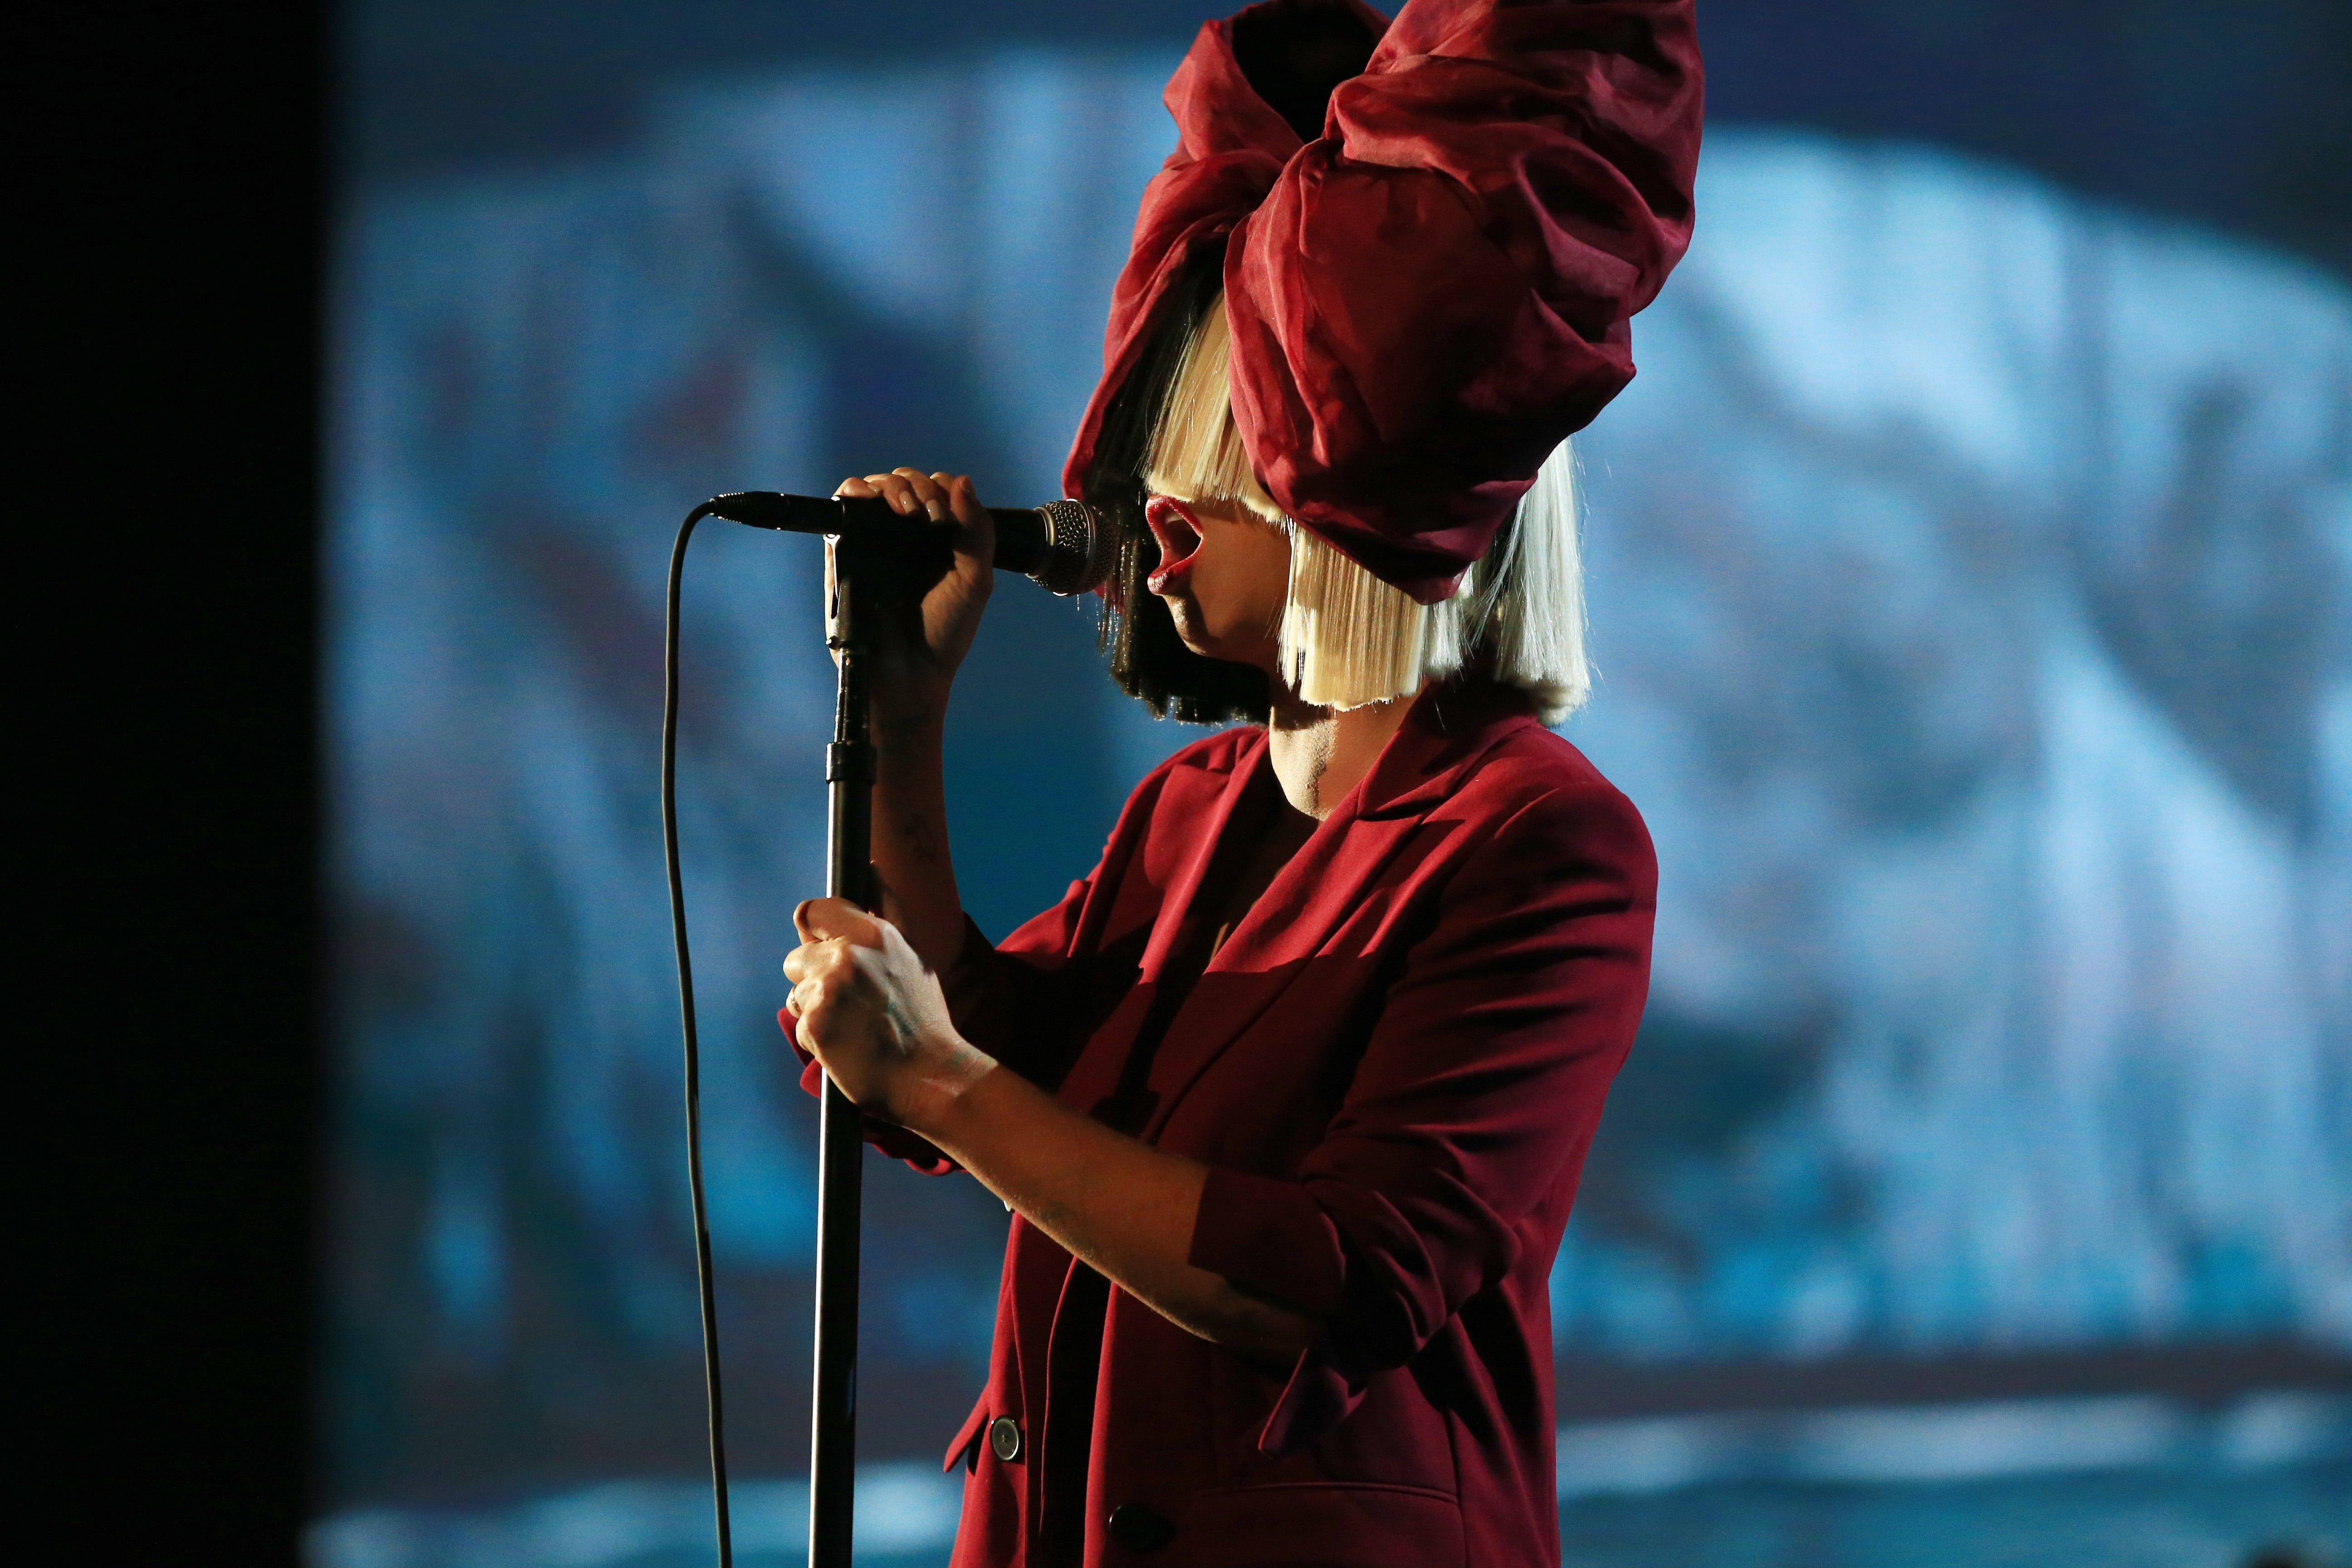 Unstoppable (Sia song) - Wikipedia